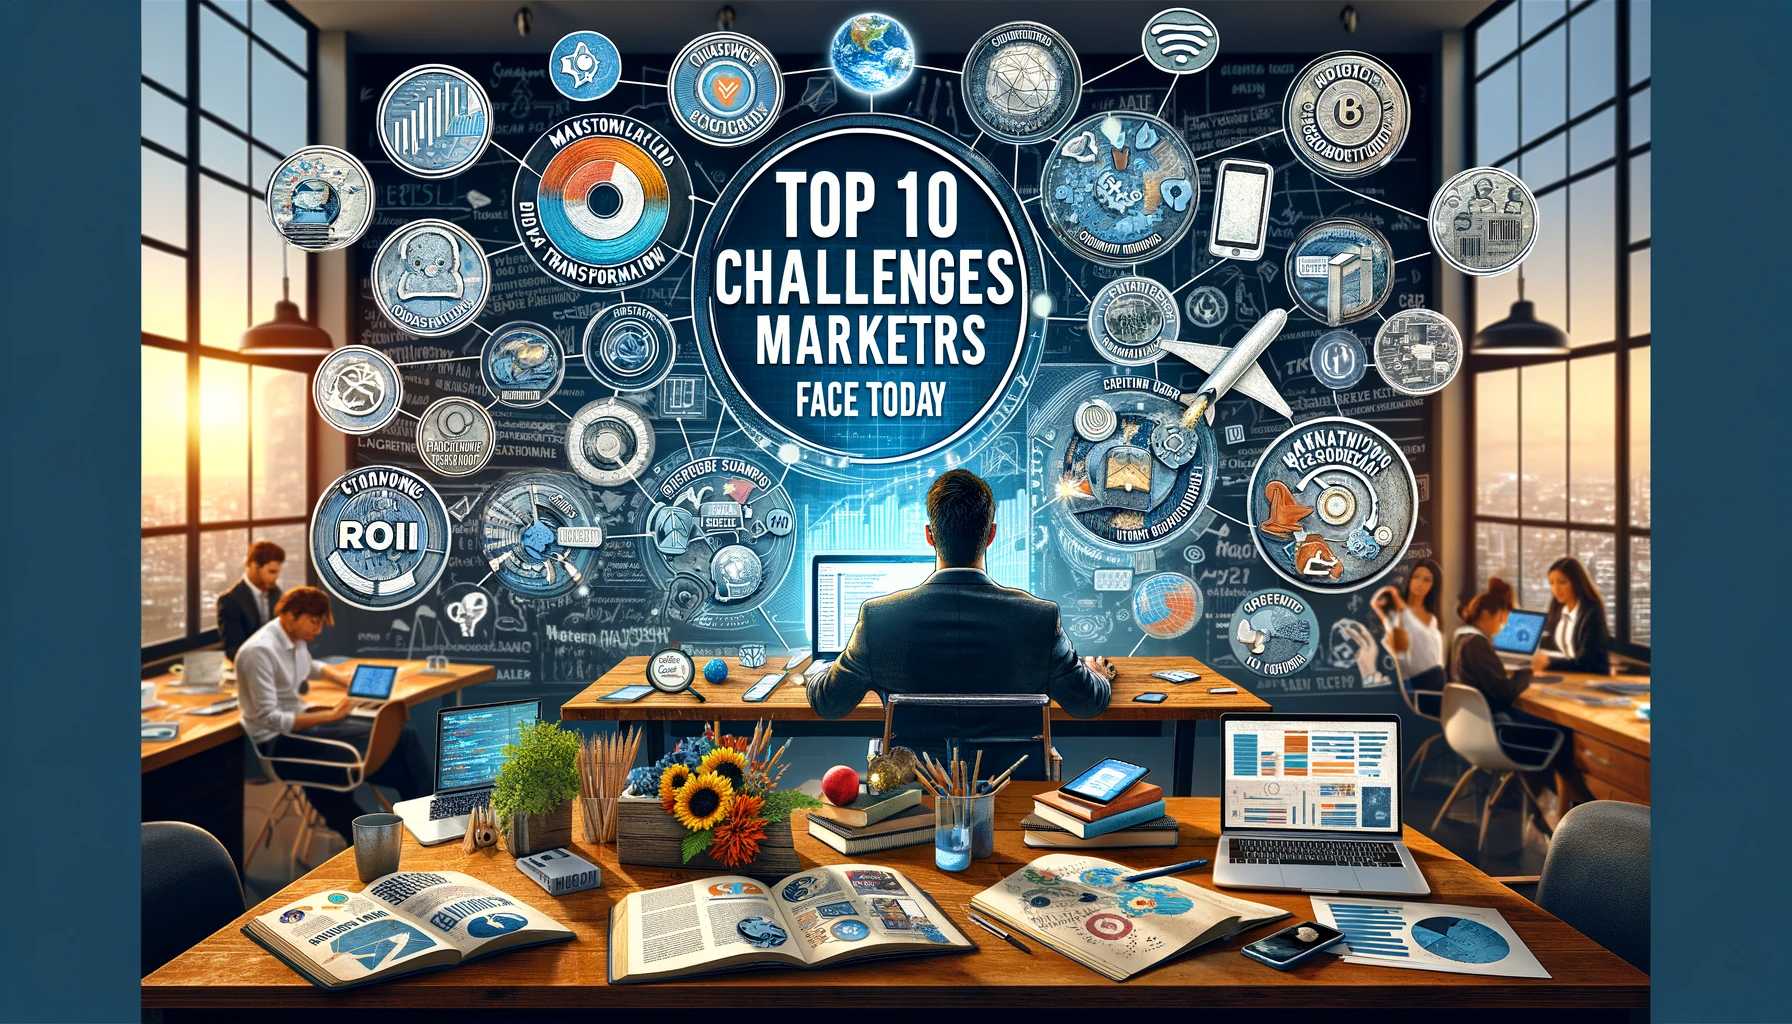 Top 10 Challenges Marketers Face Today